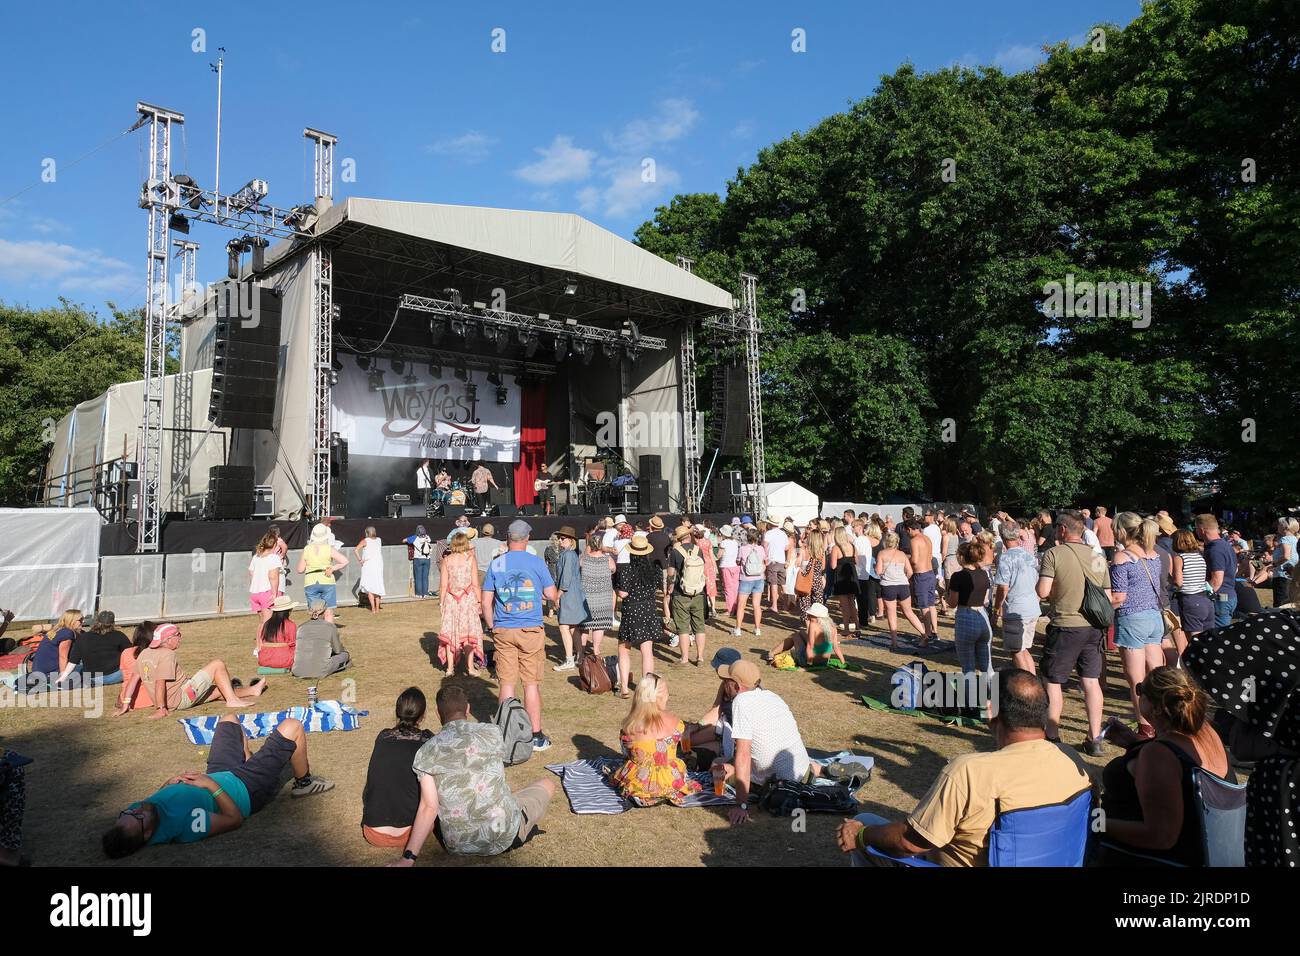 Festival goers await the next main stage act at Weyfest Festival, Rural Life Centre, Tilford, England, UK. August 19, 2022 Stock Photo